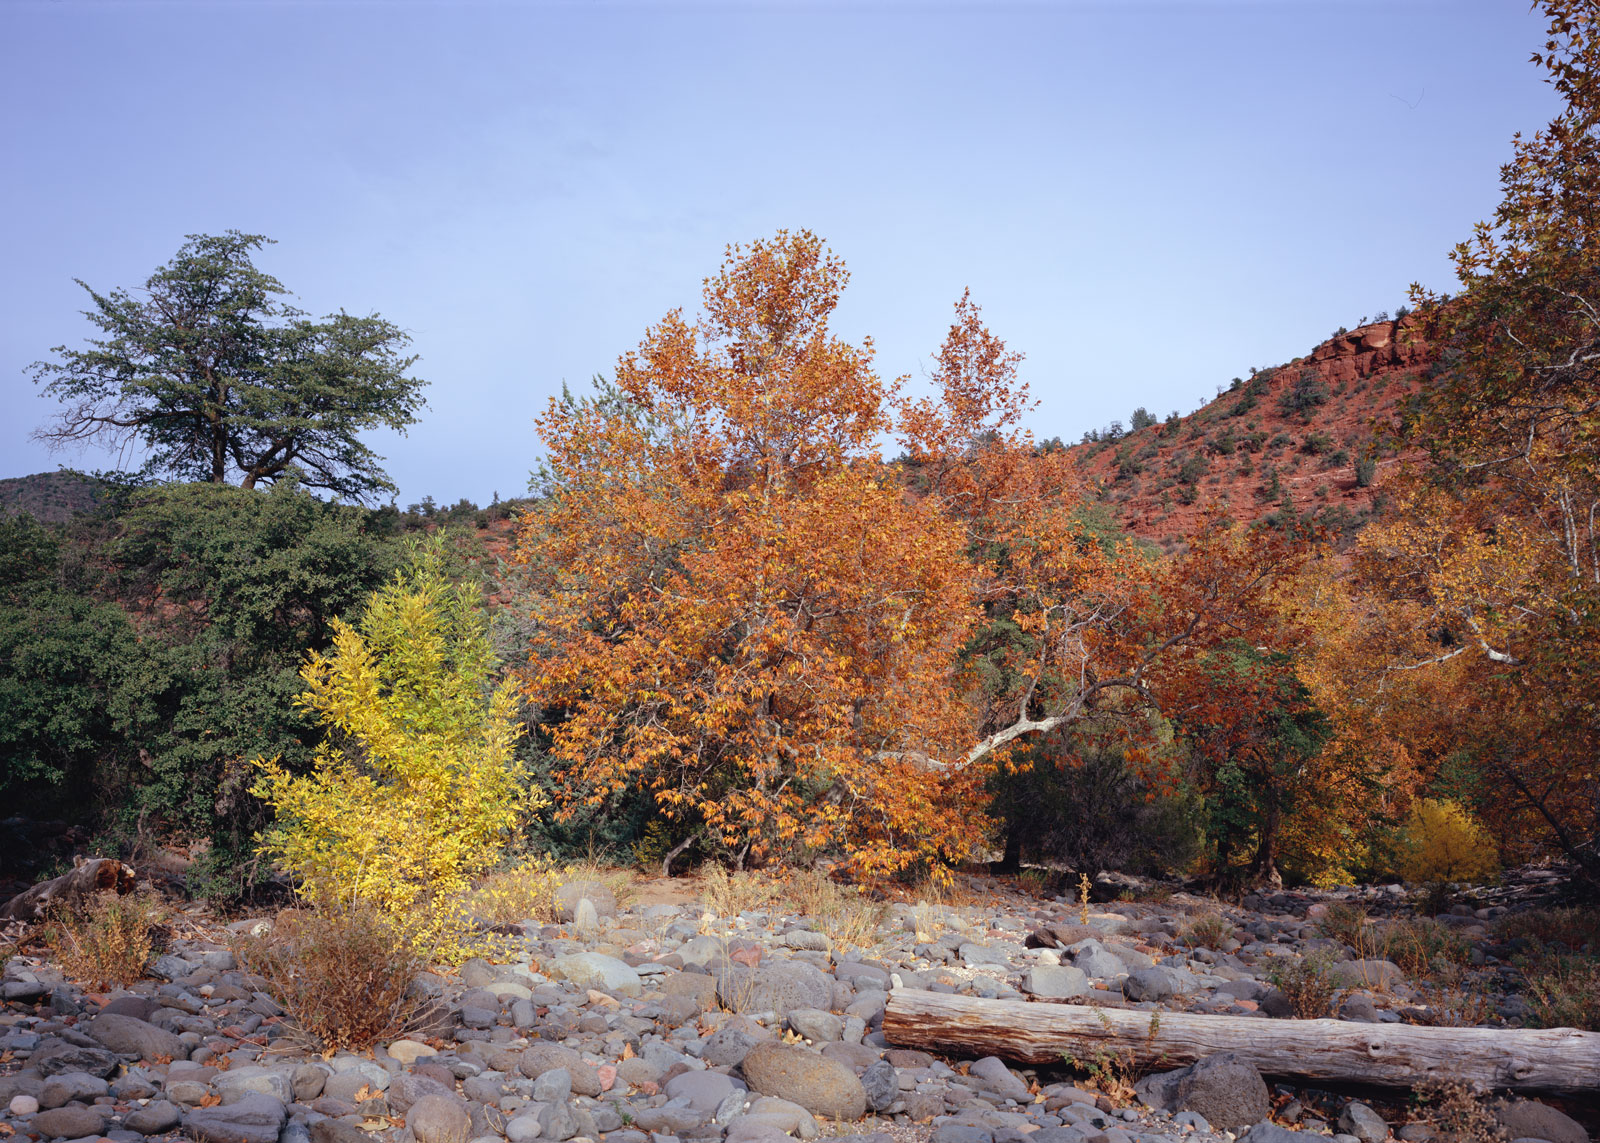 Fall leaves on the Sycamores, with the yellow bush and a log in front, at Grasshopper Point north of Sedona